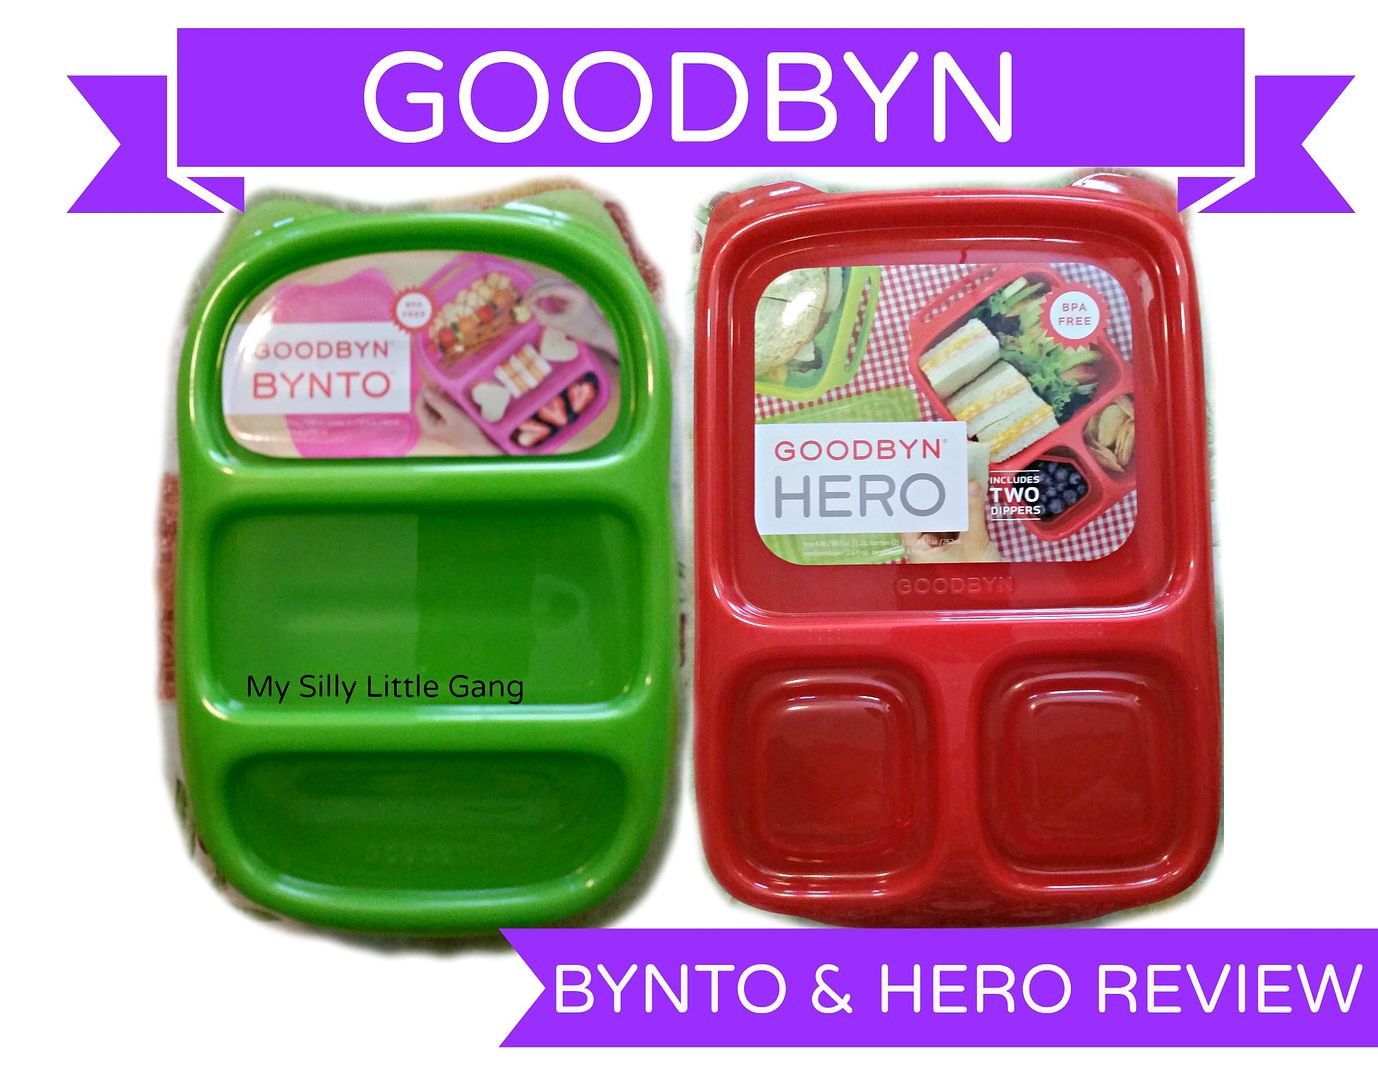 Goodby Bynto & Hero Review